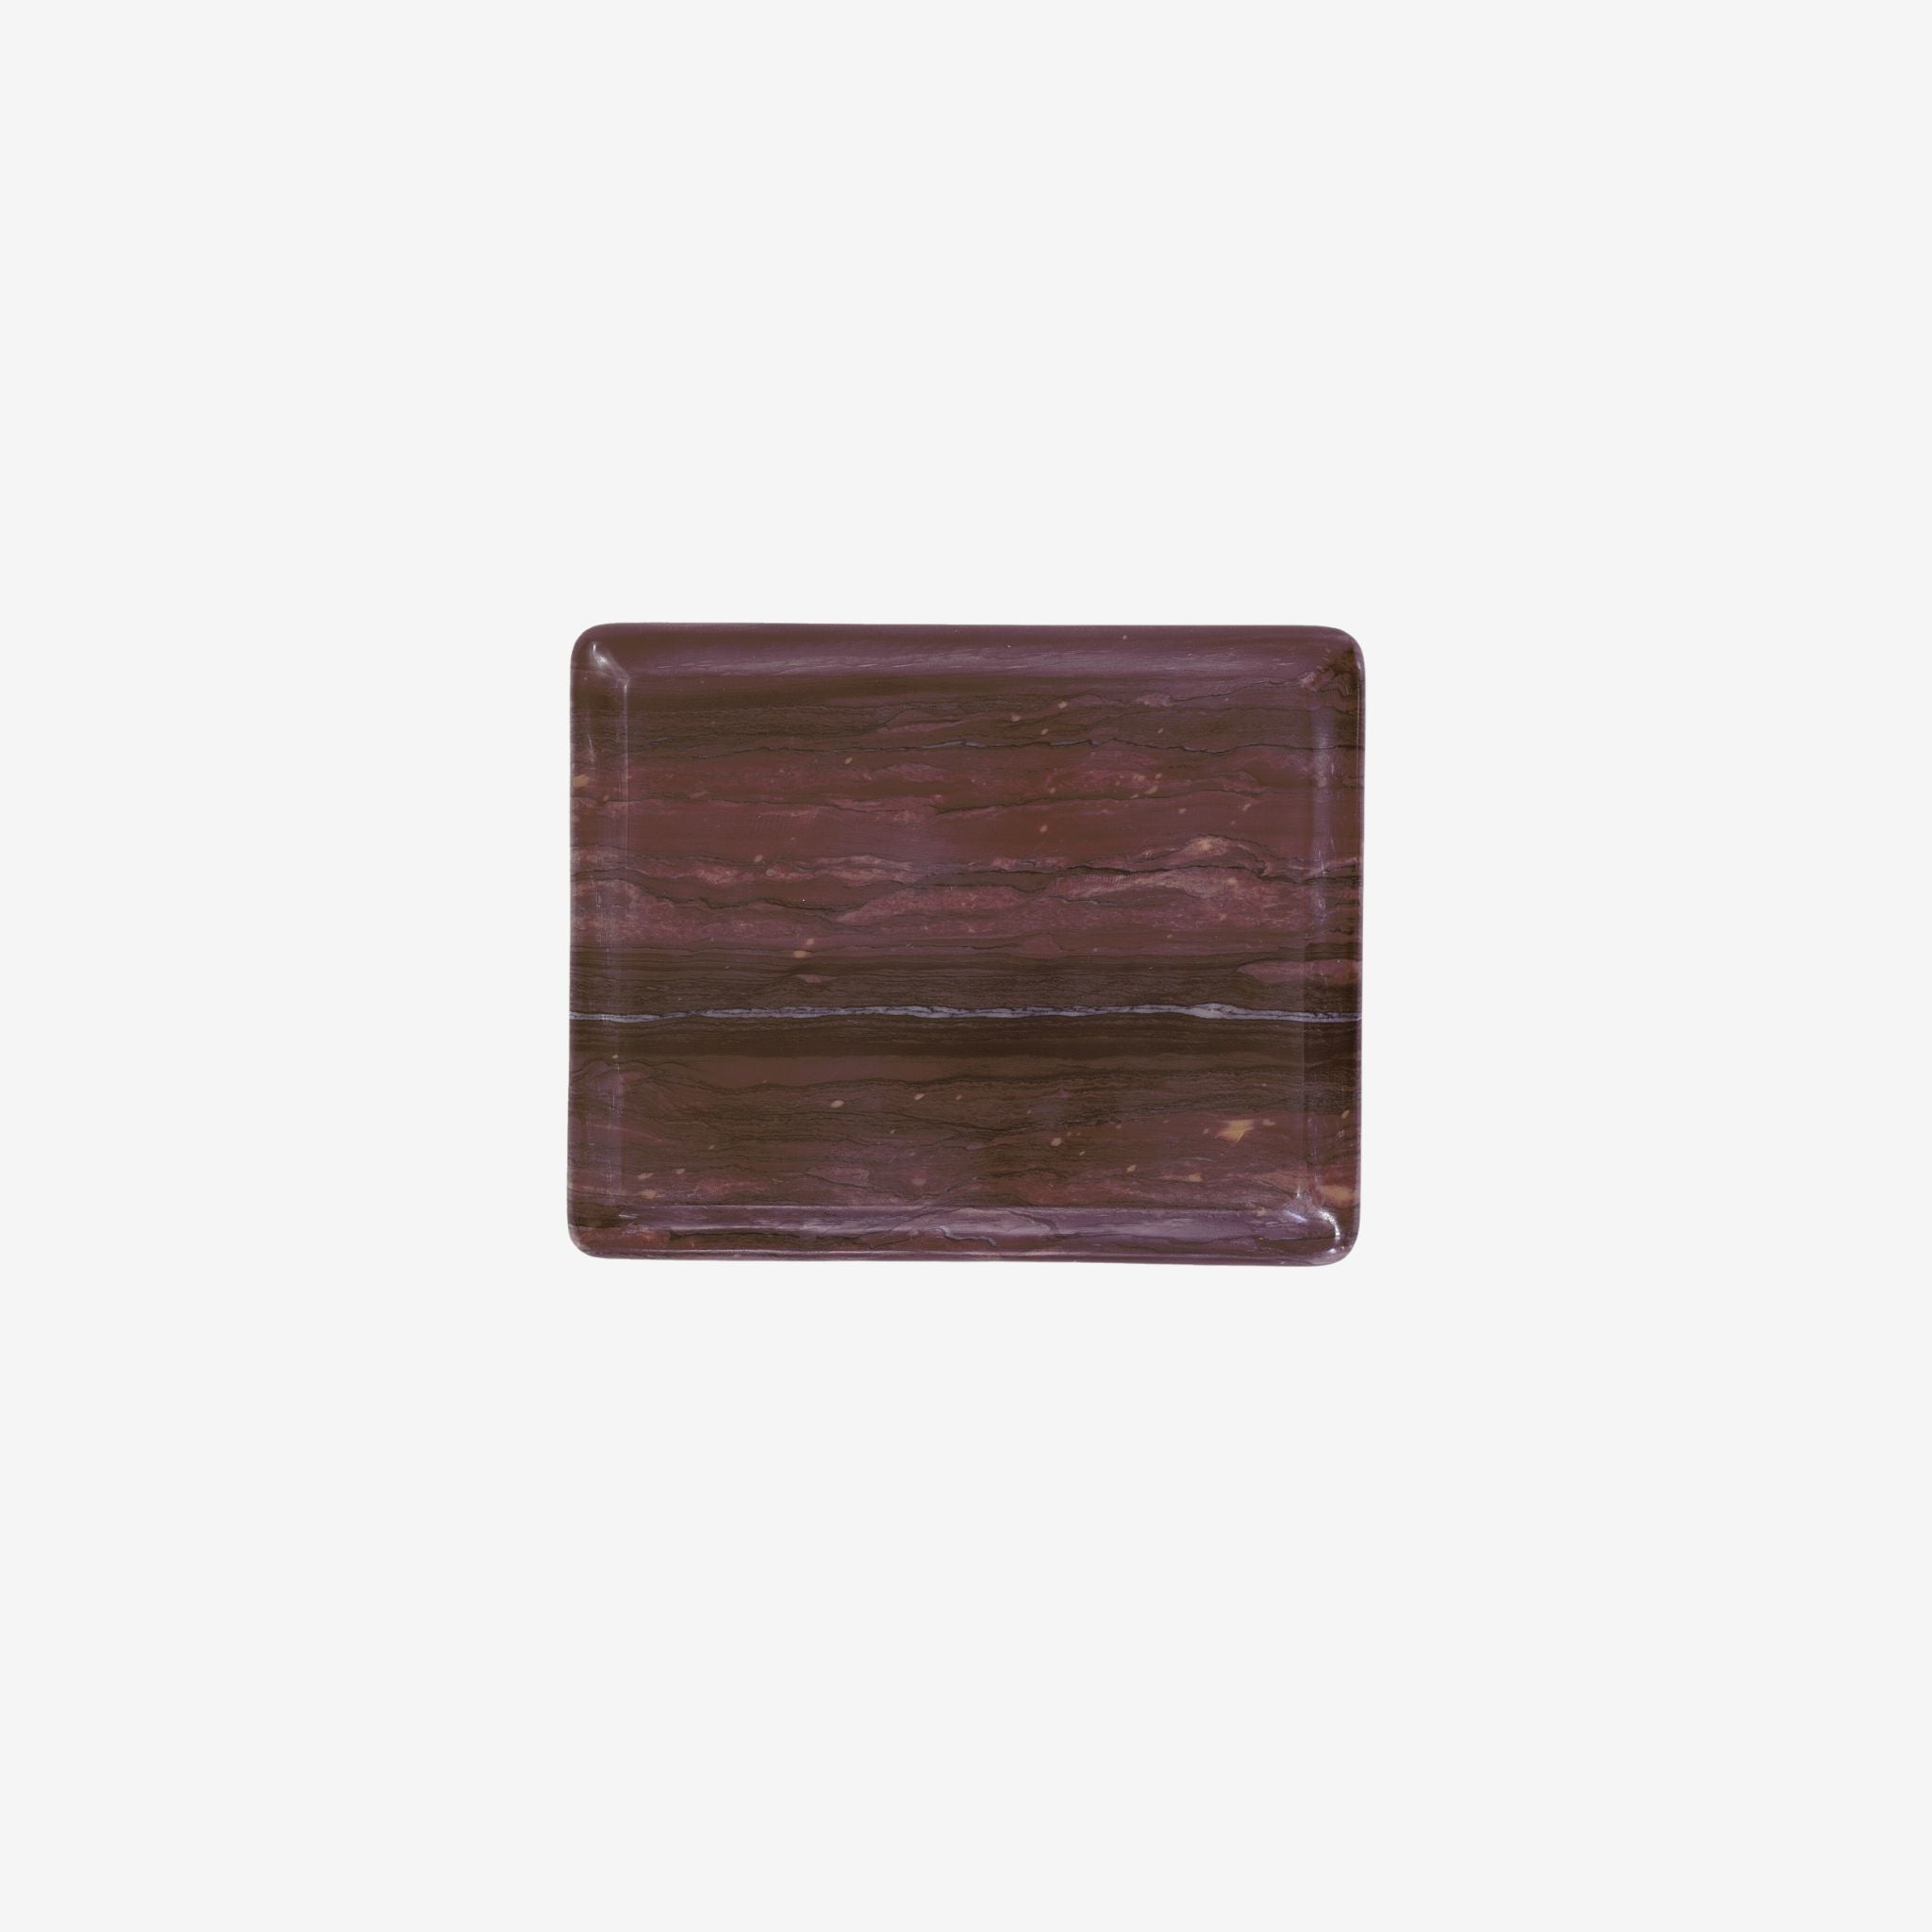 RED MARBLE OGEE SLAB - SIMPLY ELEVTAED HOME FURNISHING 